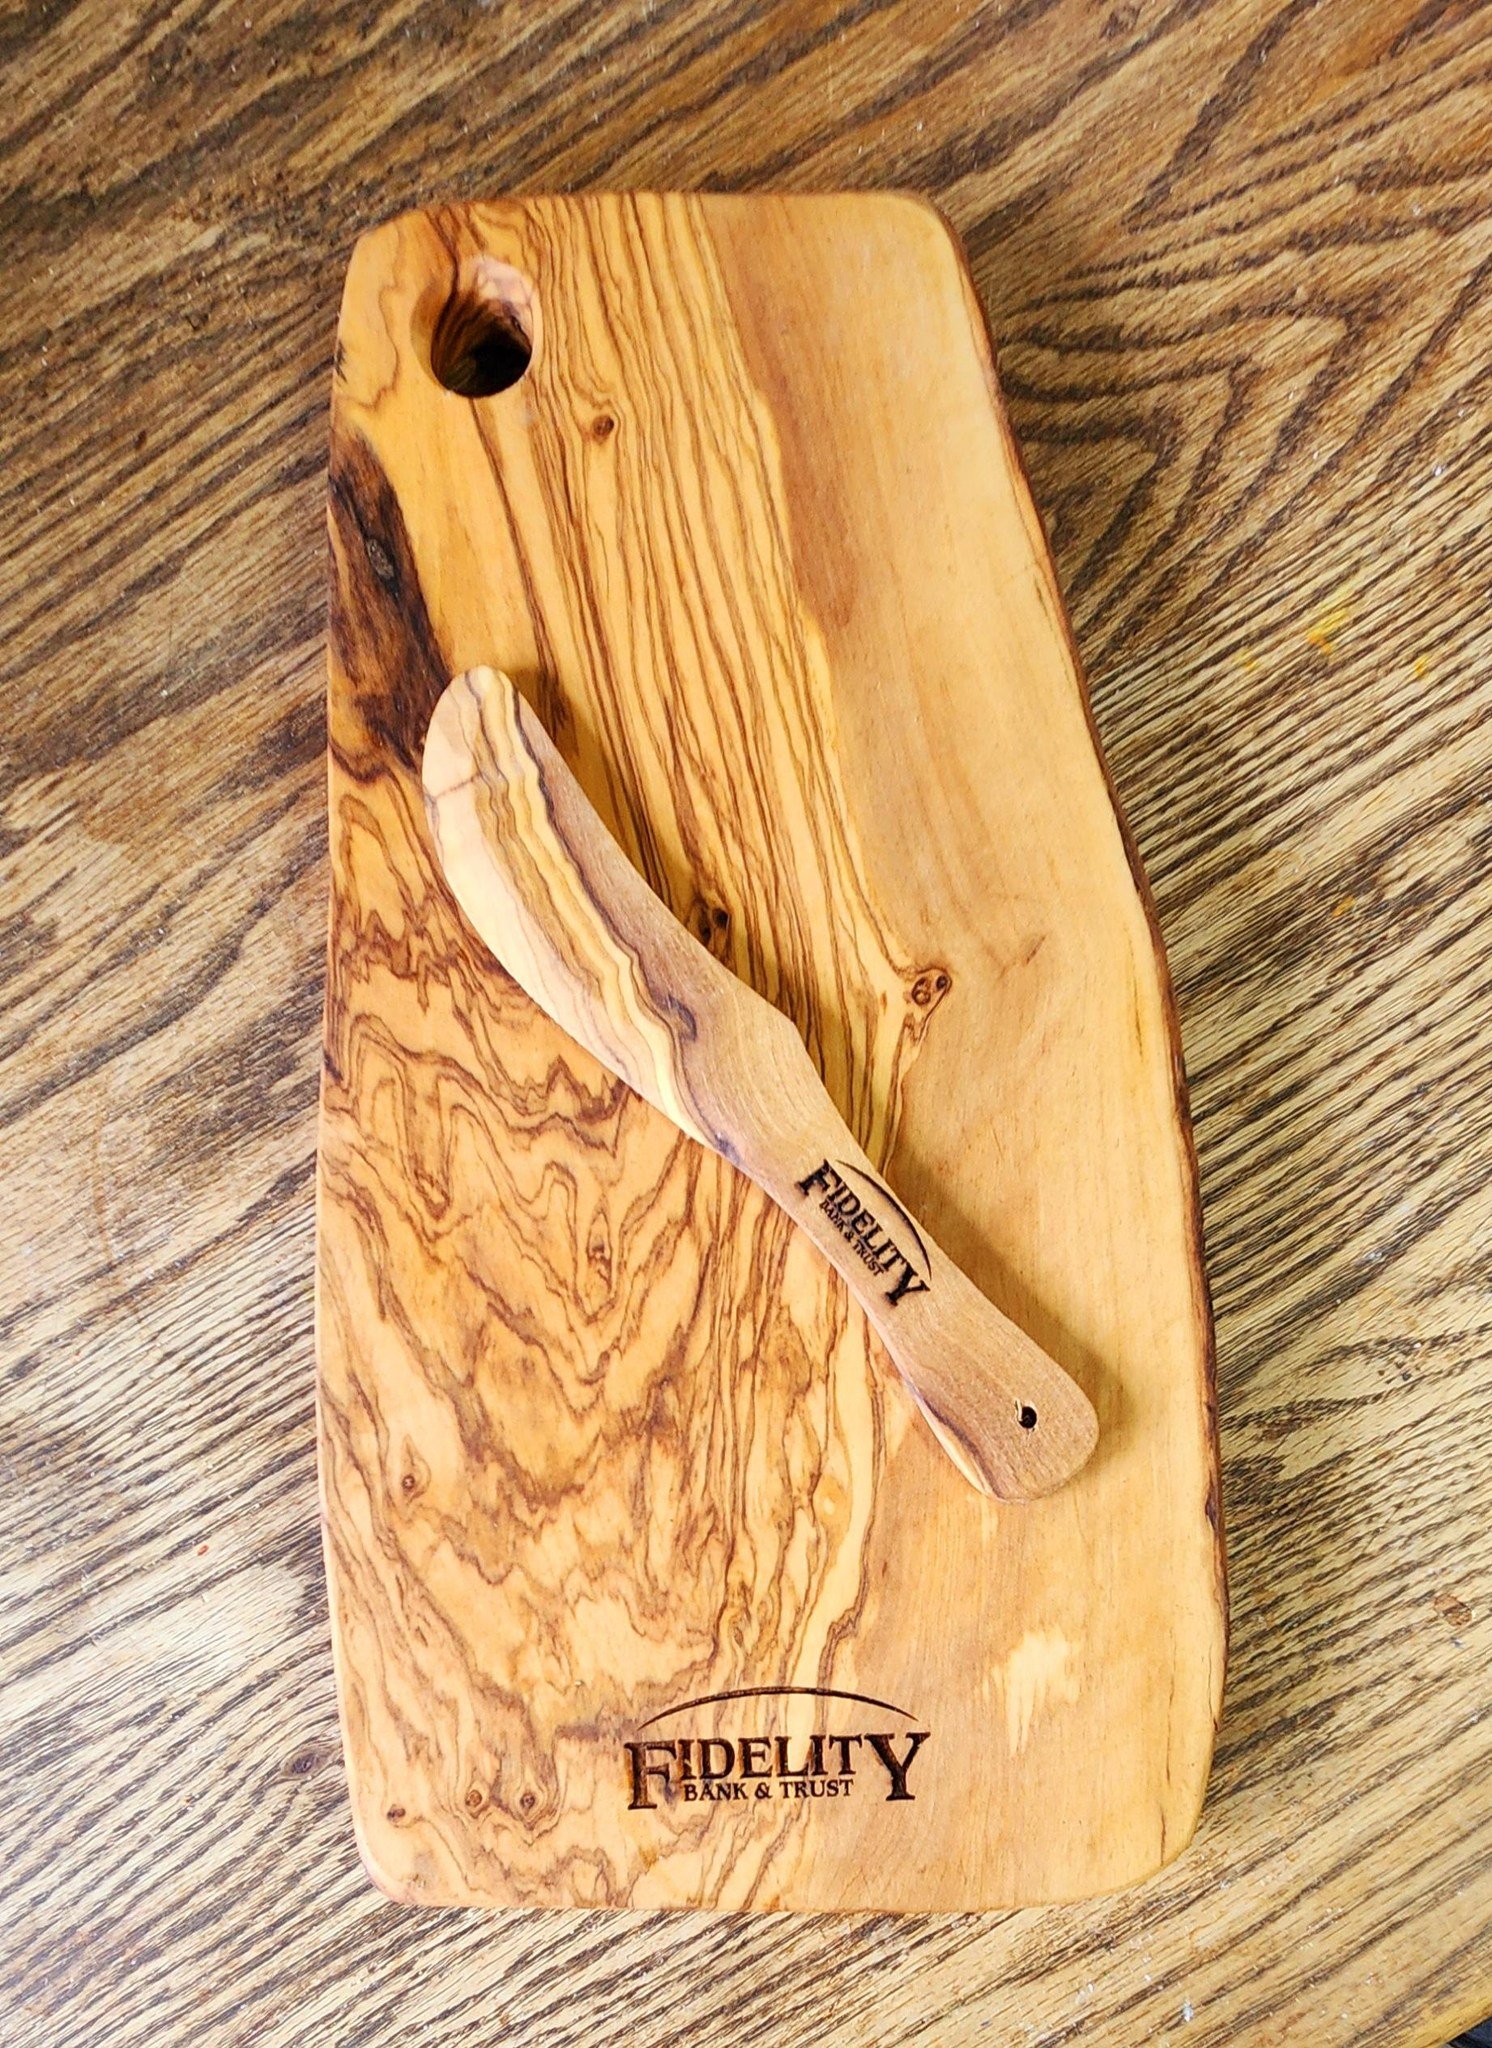 Custom engraved various cutting boards and coasters for an upcoming event for Fidelity Bank. #zalaznikcreative #fidelitybank